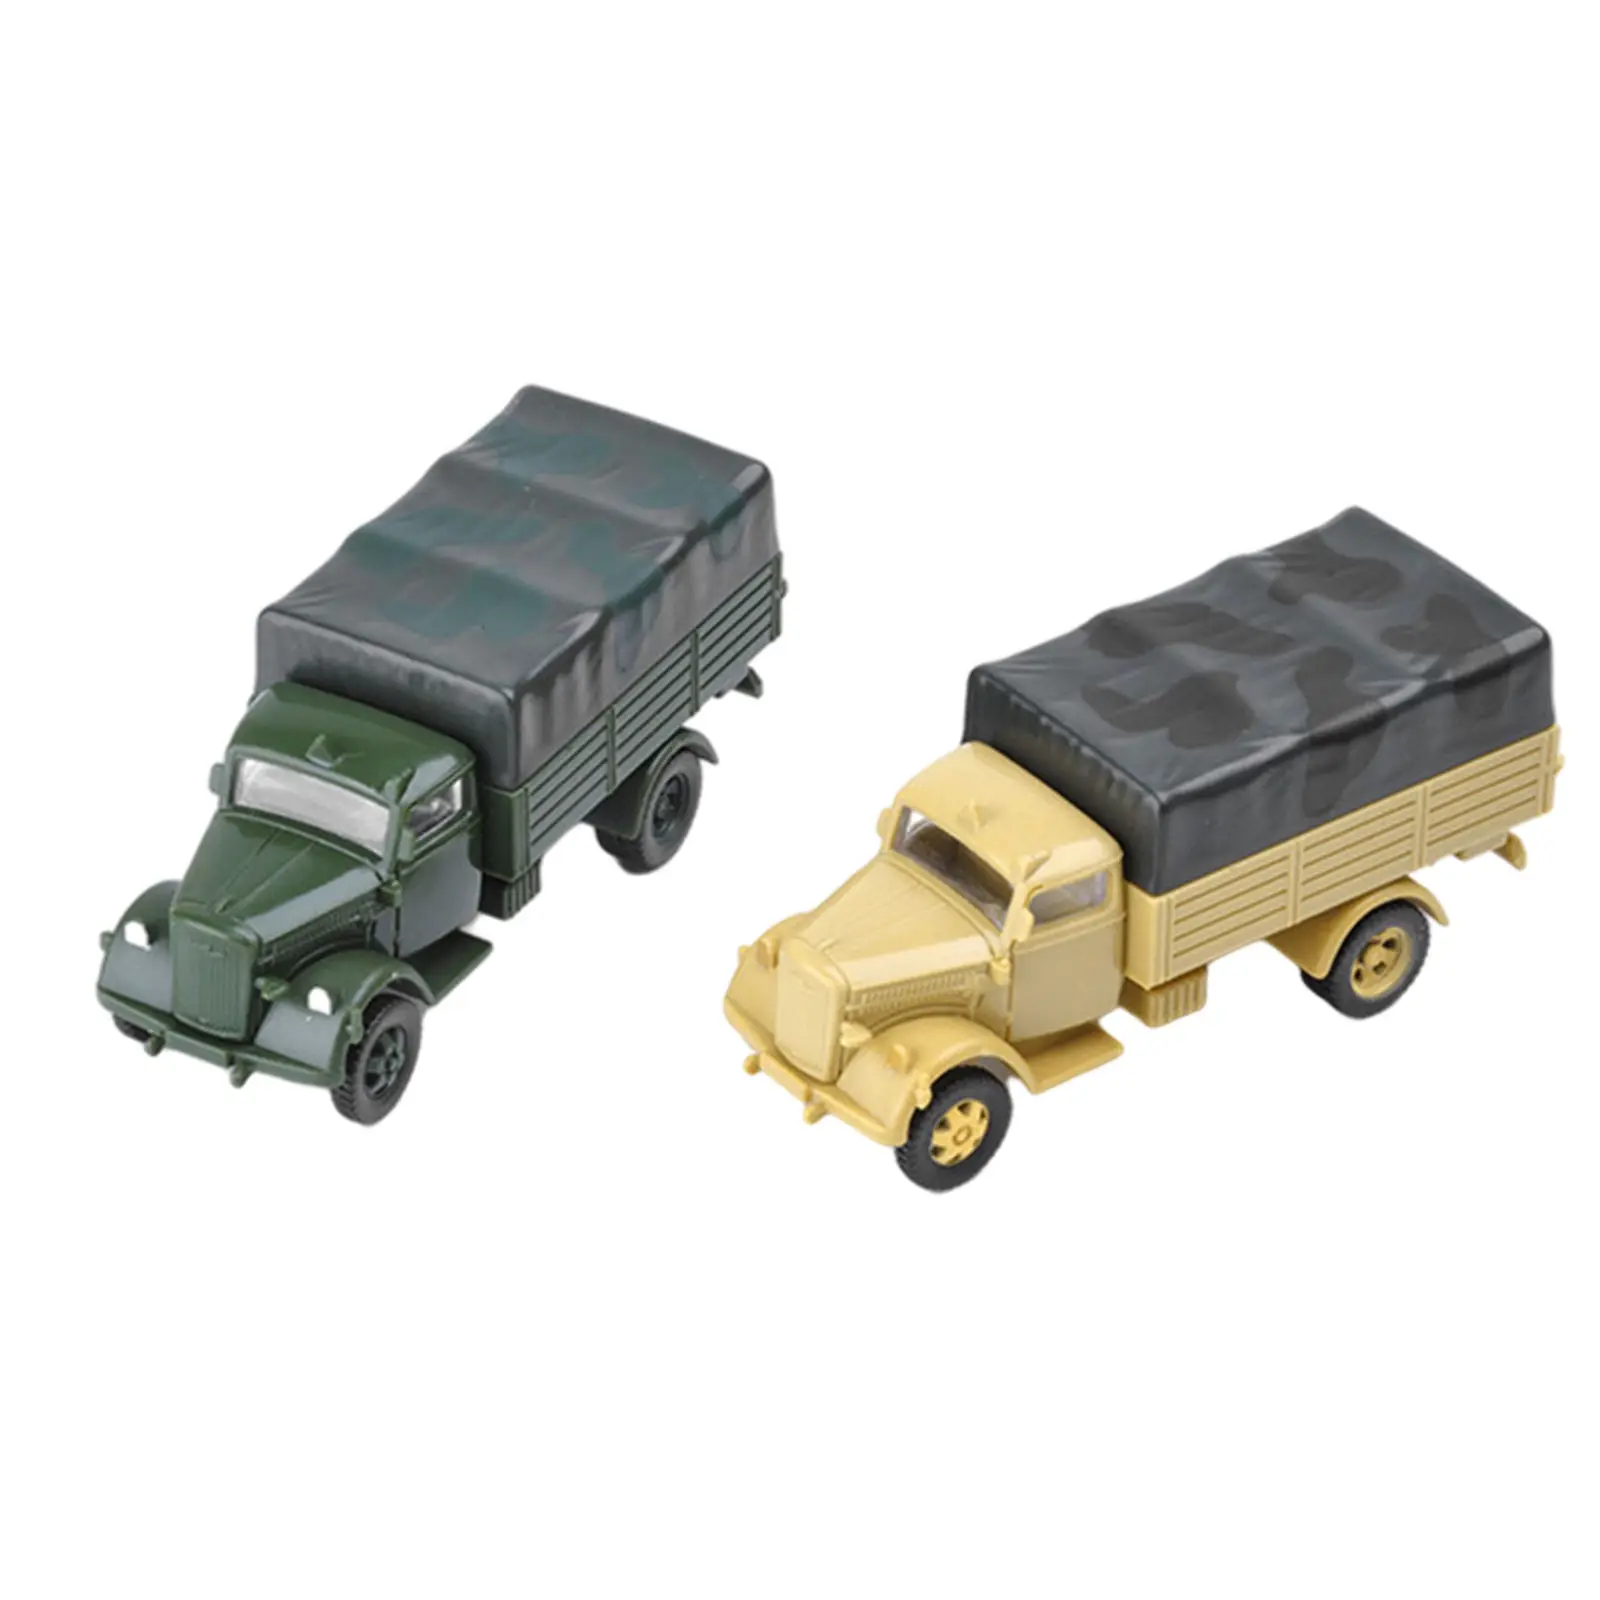 Set of 2 1:72 4D Assemble Truck Plastic Building Kit Educational Toy Simulation Chariot 80 Wheeled Collectibles Armored Vehicle